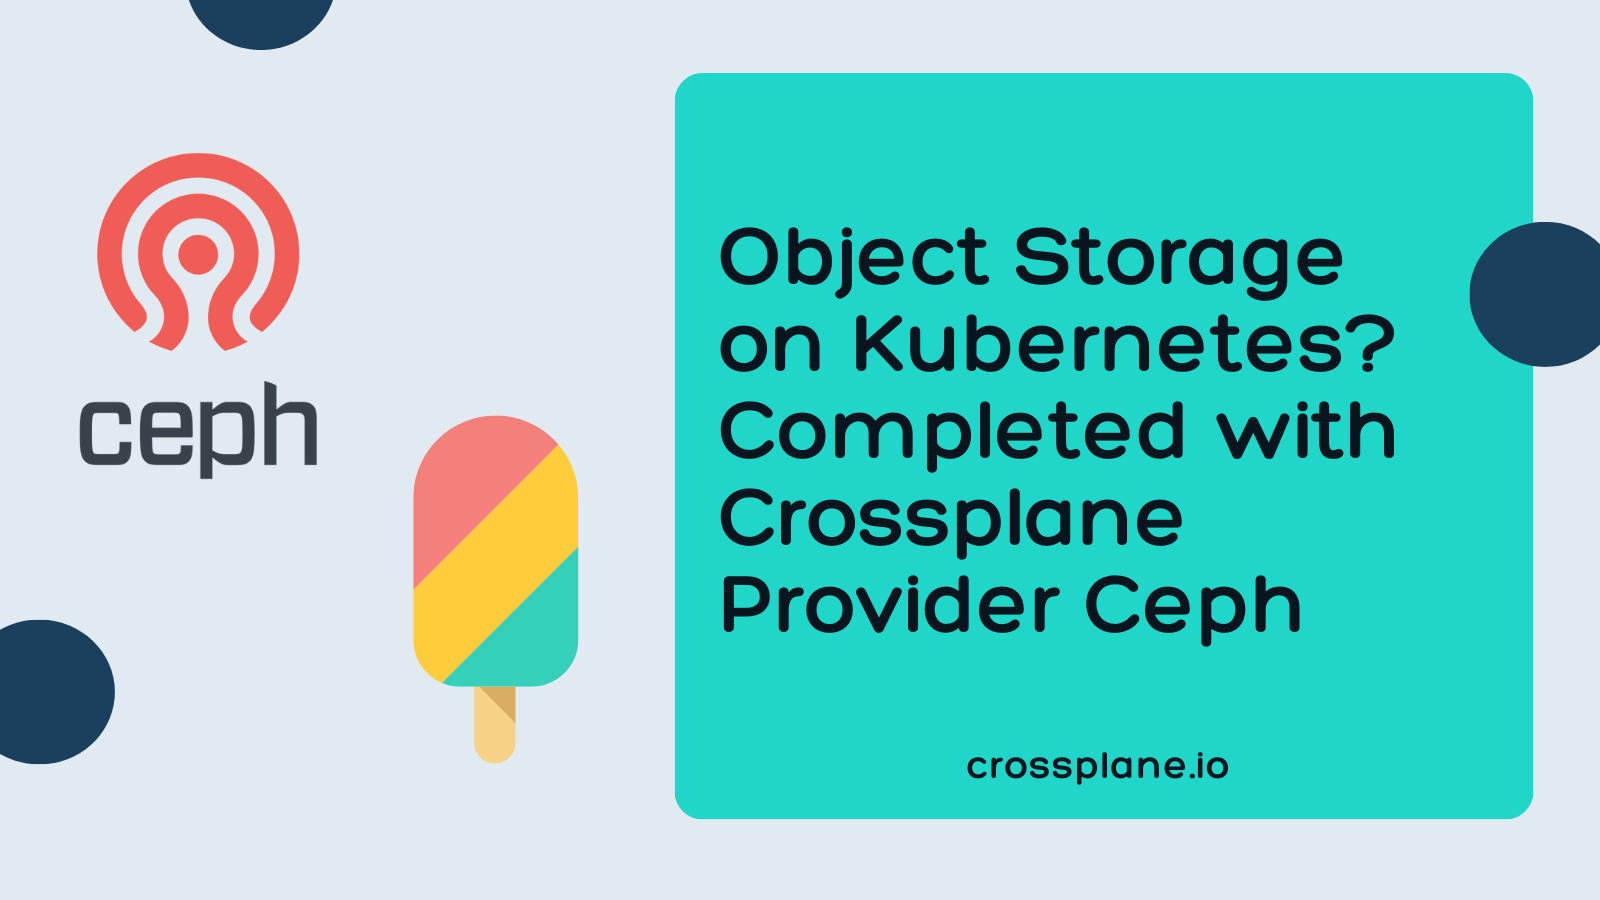 Object Storage on Kubernetes? Completed with Crossplane Provider Ceph